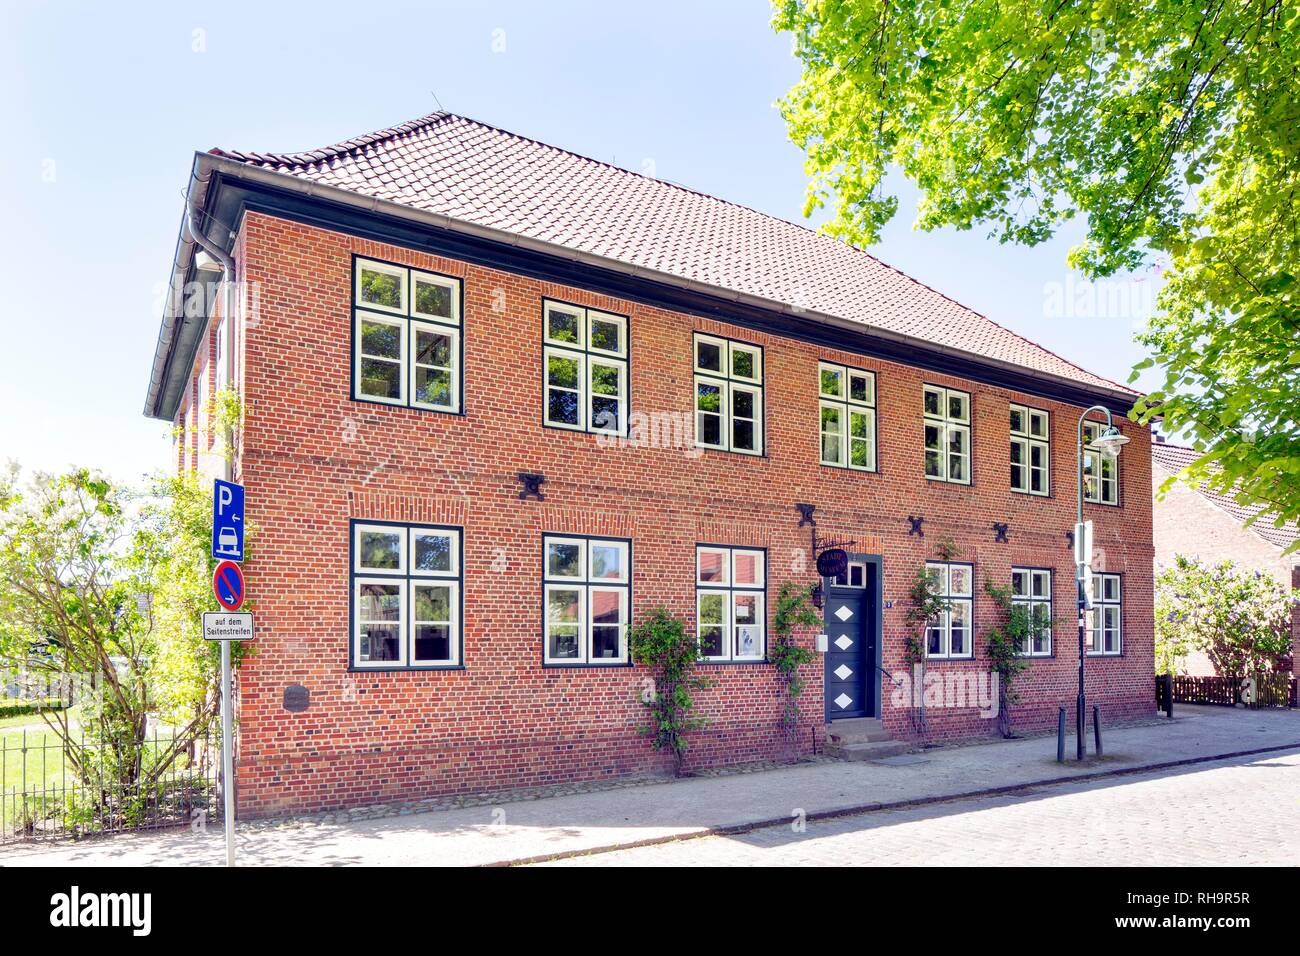 City Museum, Wedel, Schleswig-Holstein, Germany Stock Photo